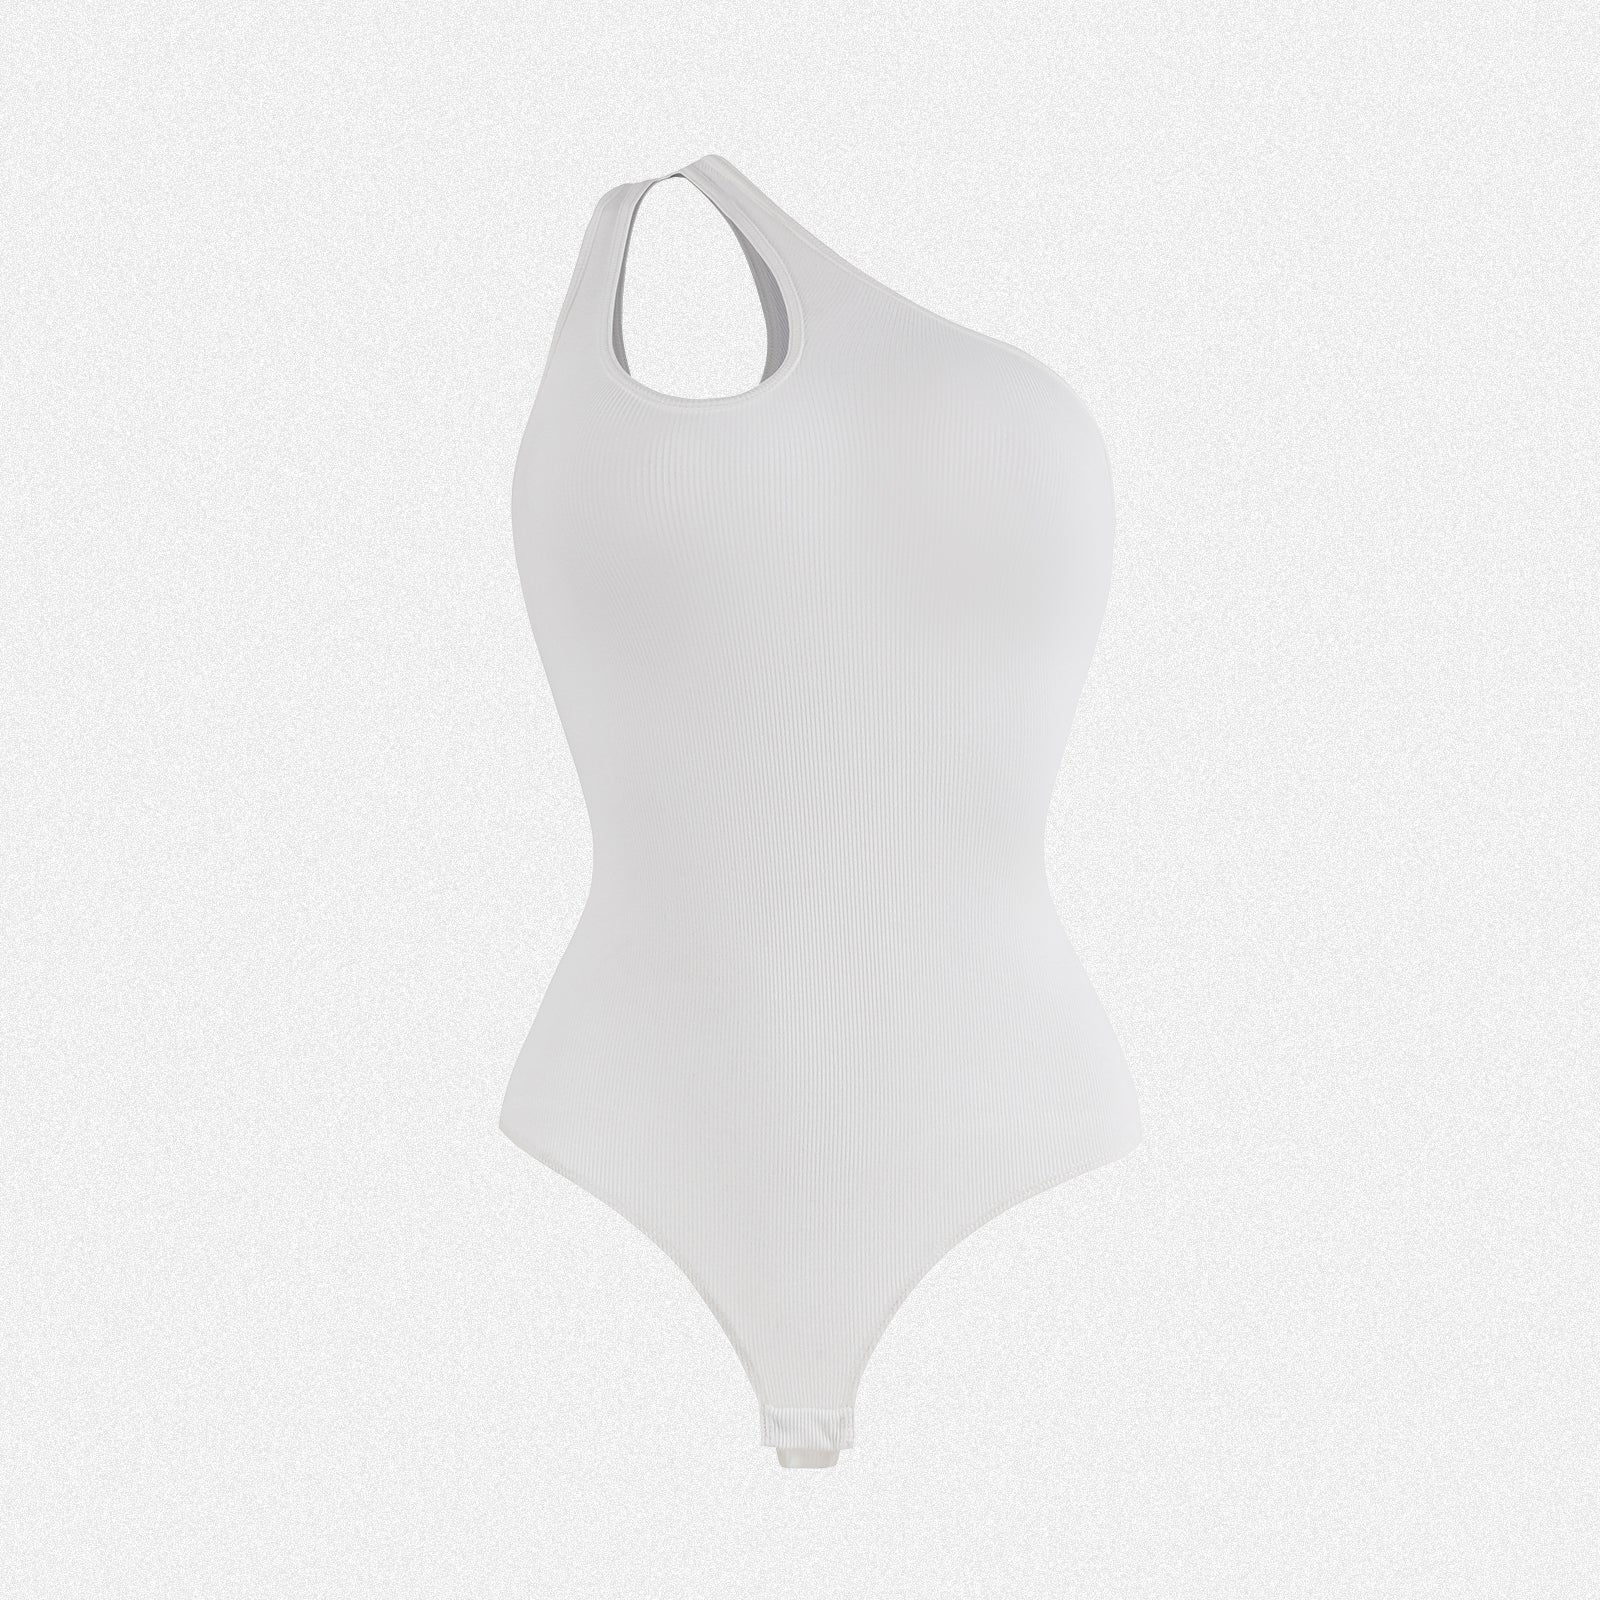 Shaperin One Shoulder Sleeveless Going Out Bodysuits Tops